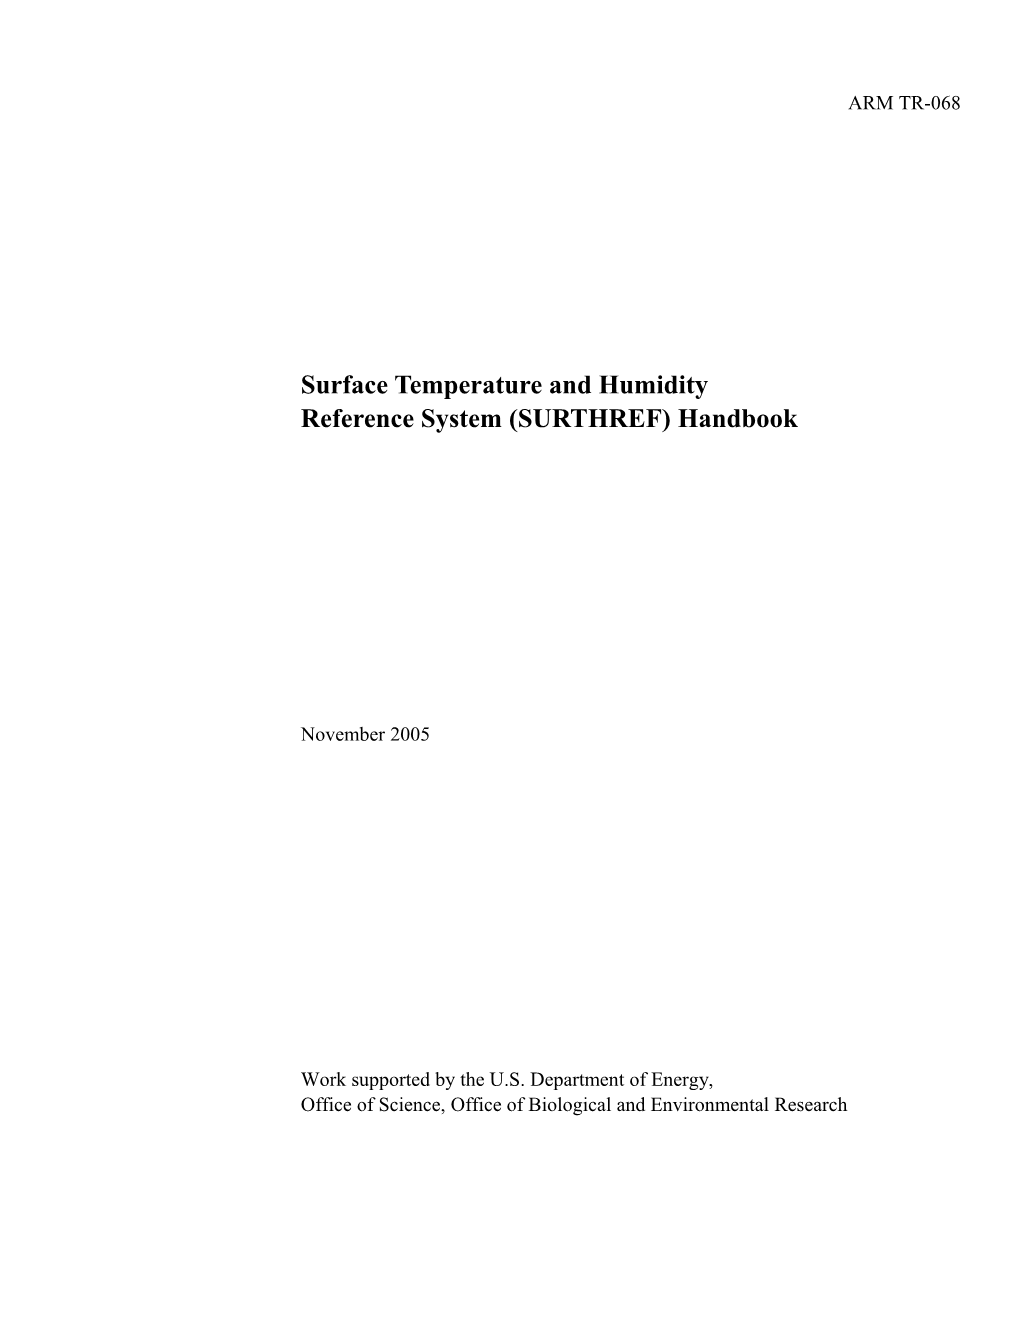 Surface Temperature and Humidity Reference System (SURTHREF) Handbook